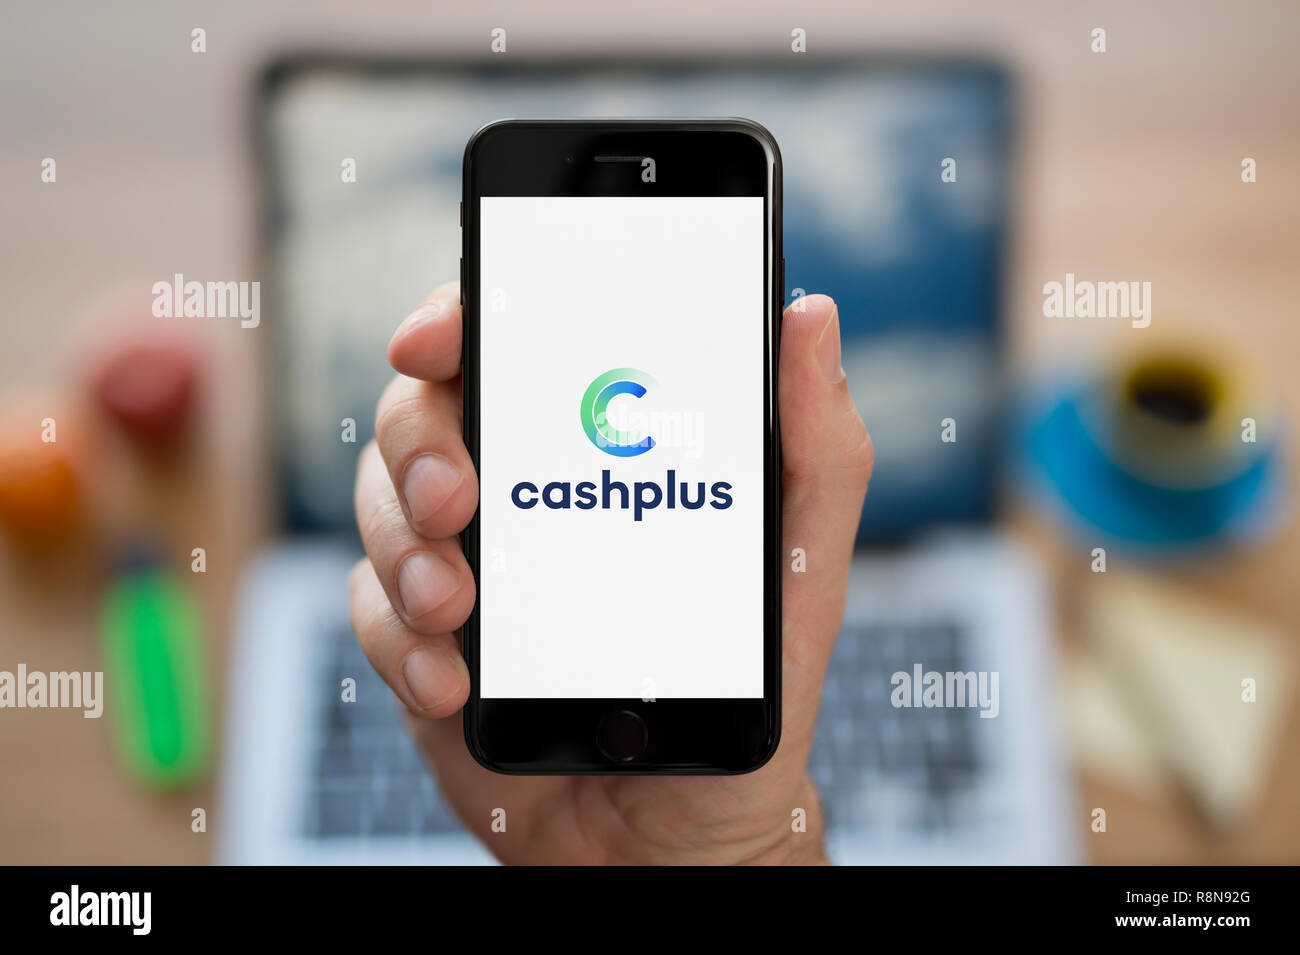 A man looks at his iPhone which displays the CashPlus logo (Editorial use only). Stock Photo